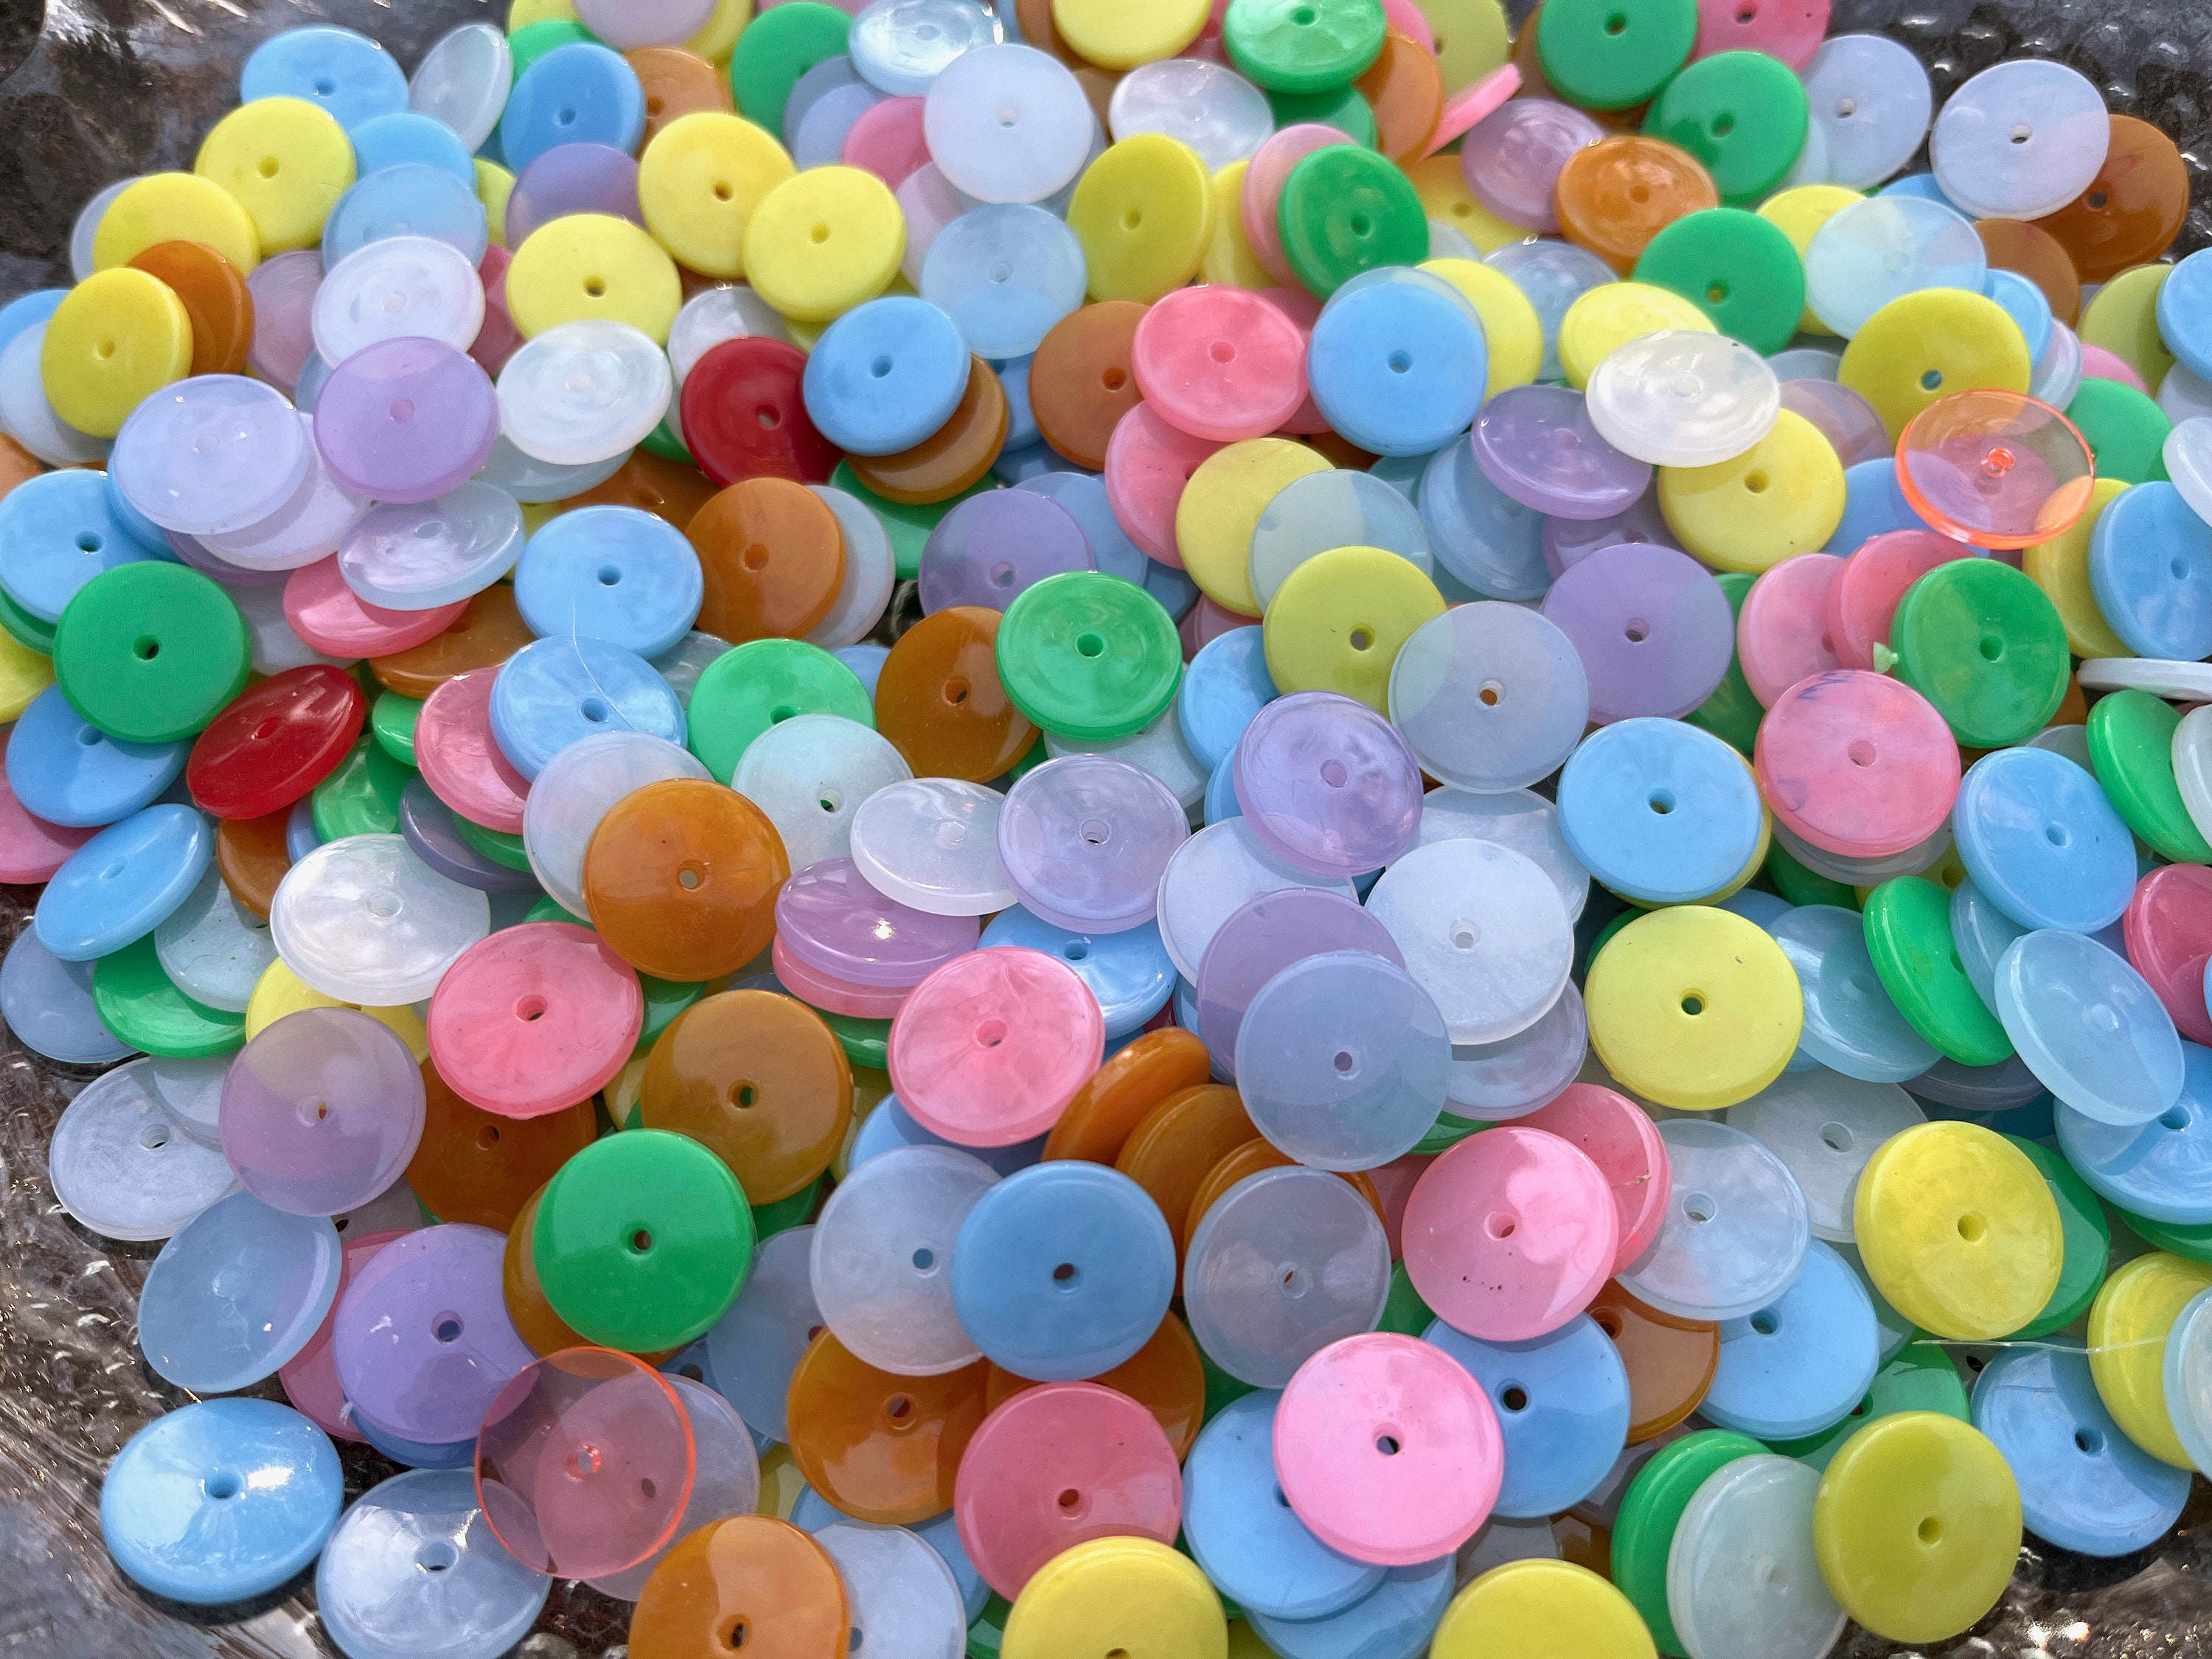 Crackle Beads - Multi-Colored - 8mm (Packs of 60; Plastic) YEAR END  INVENTORY REDUCTION SALE!